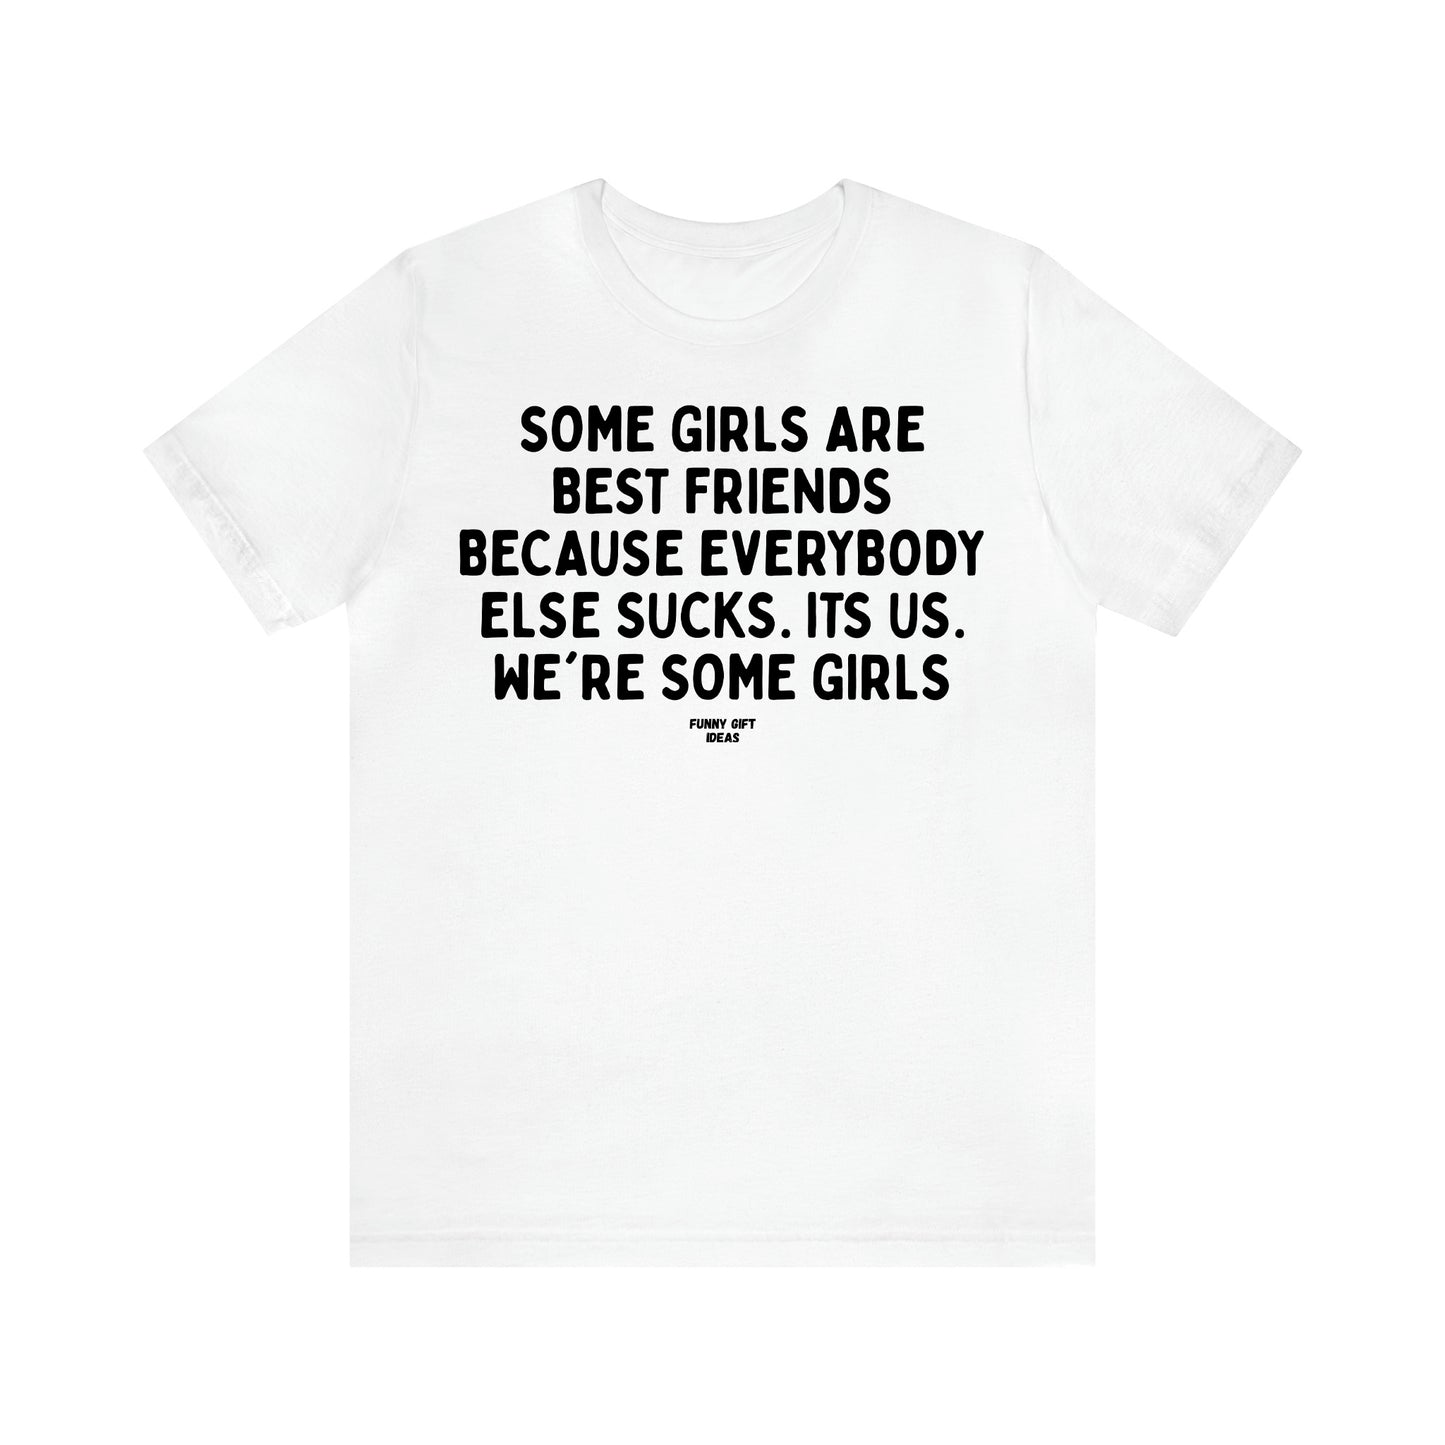 Women's T Shirts Some Girls Are Best Friends Because Everybody Else Sucks. Its Us. We're Some Girls - Funny Gift Ideas